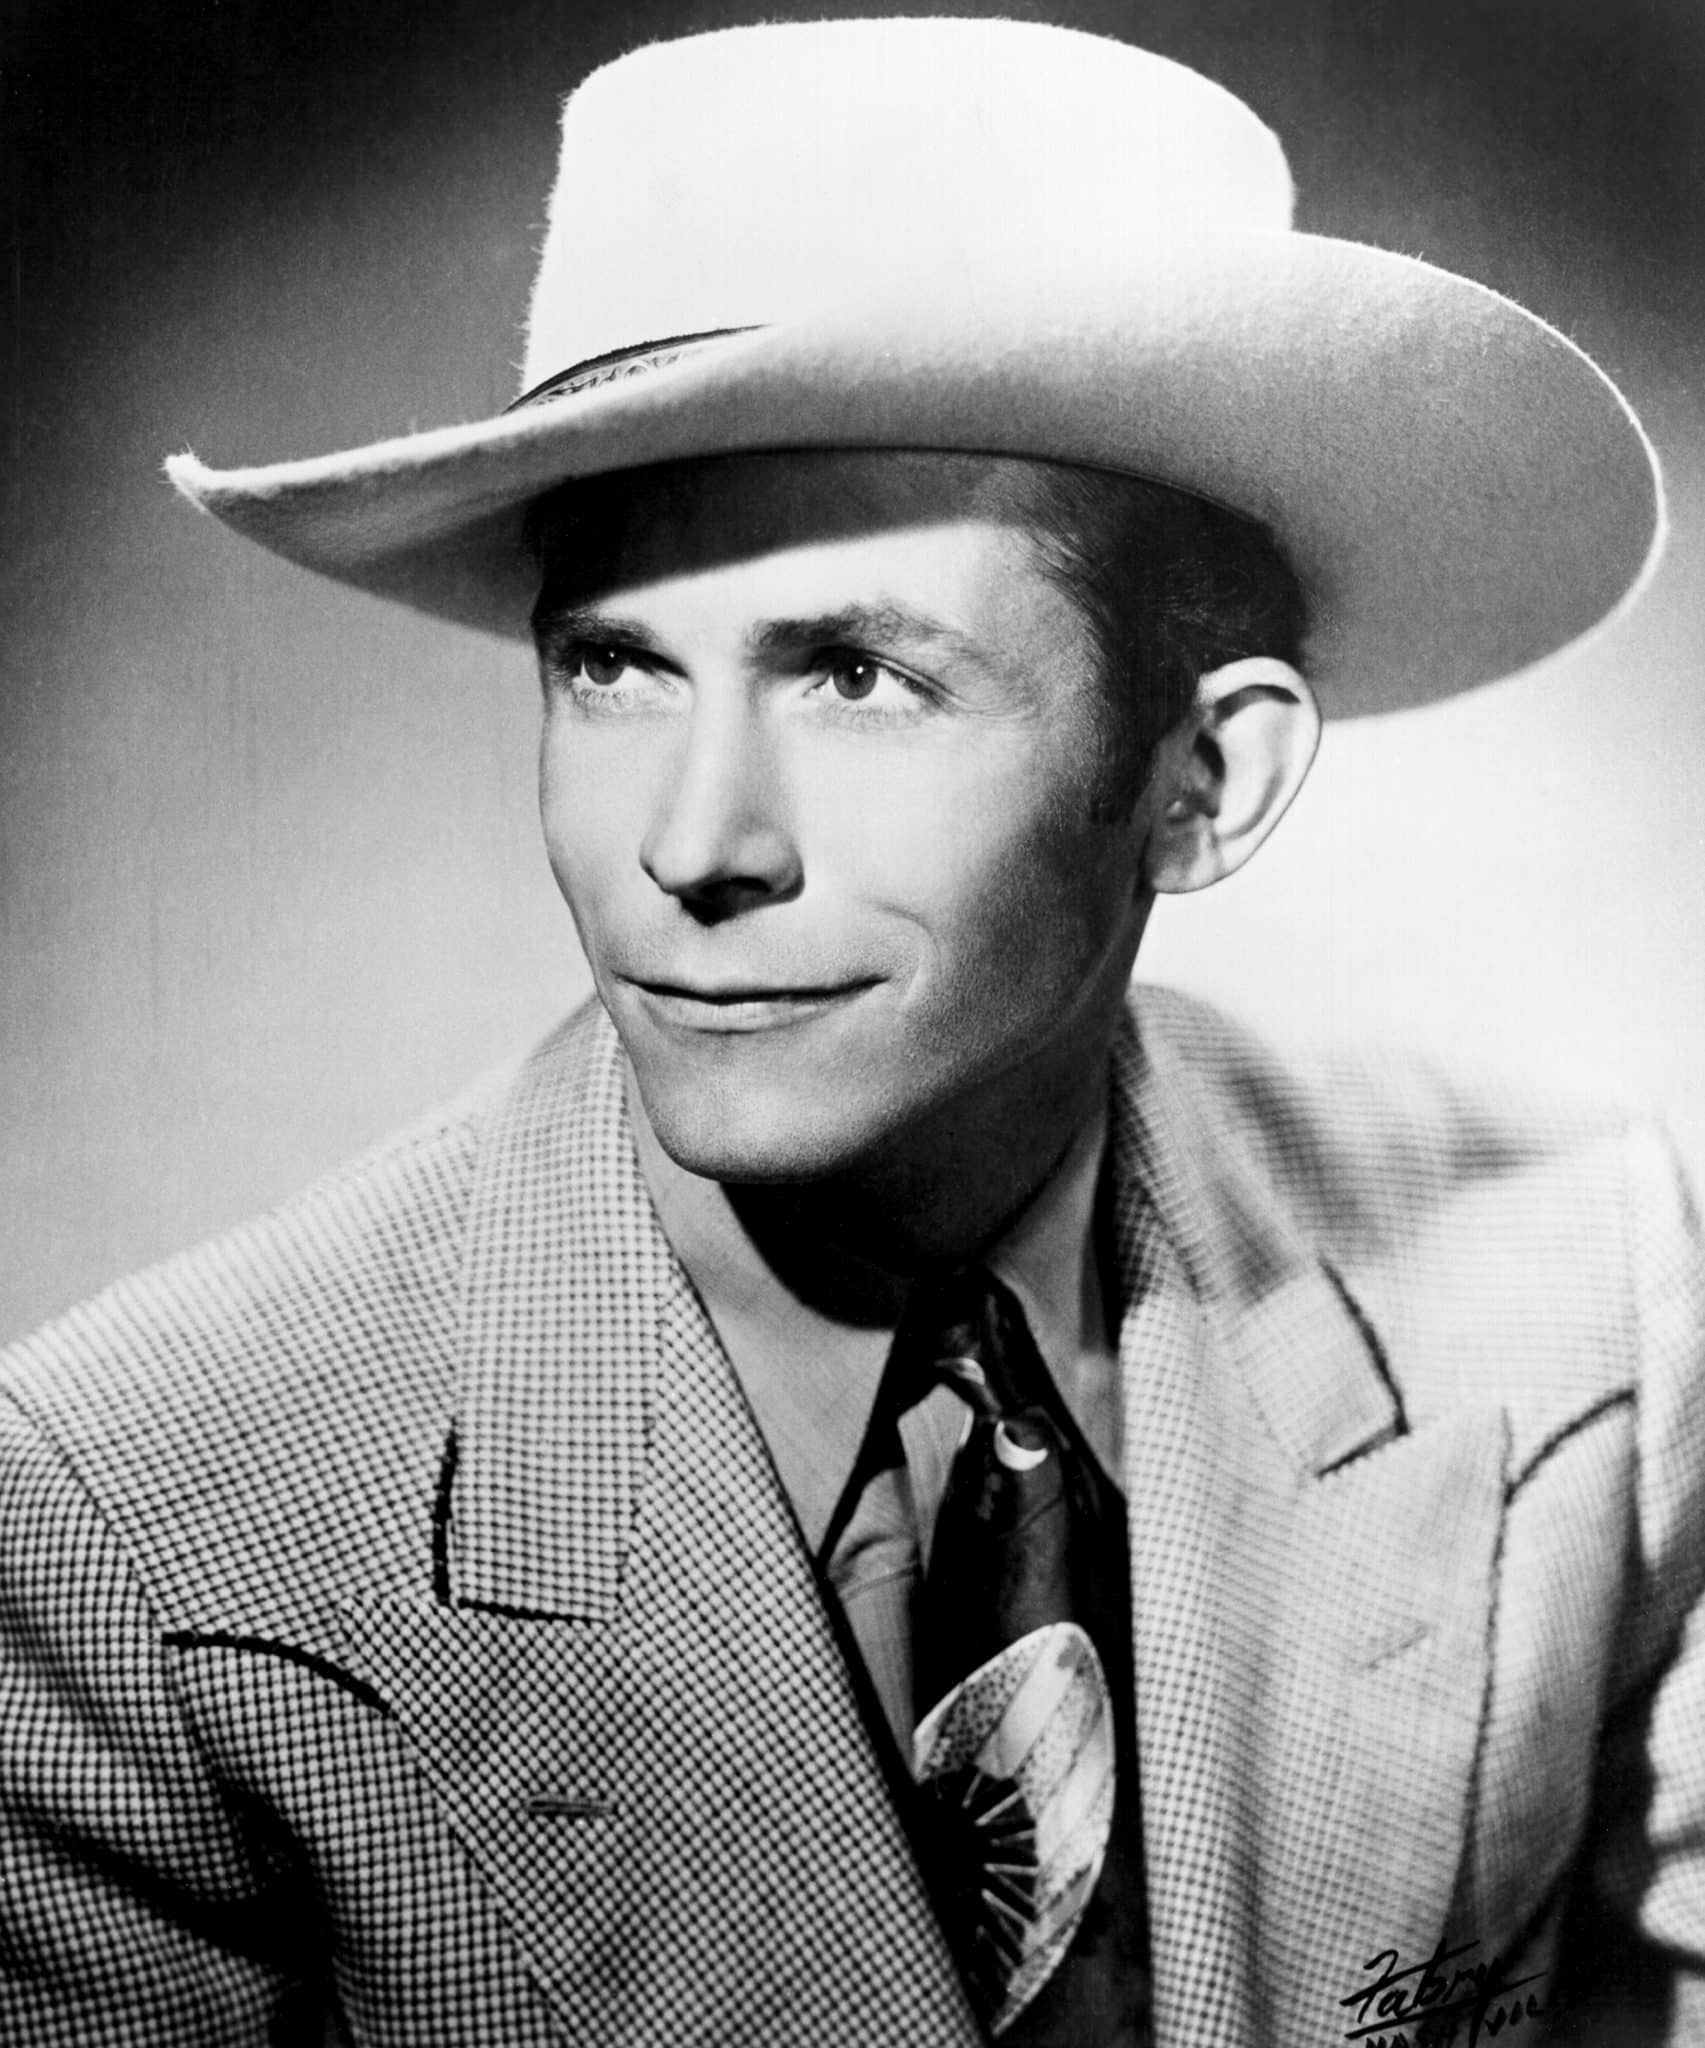 Minnie Pearl told Hank Jr. a funny story about his dad, Hank Williams, pictured here